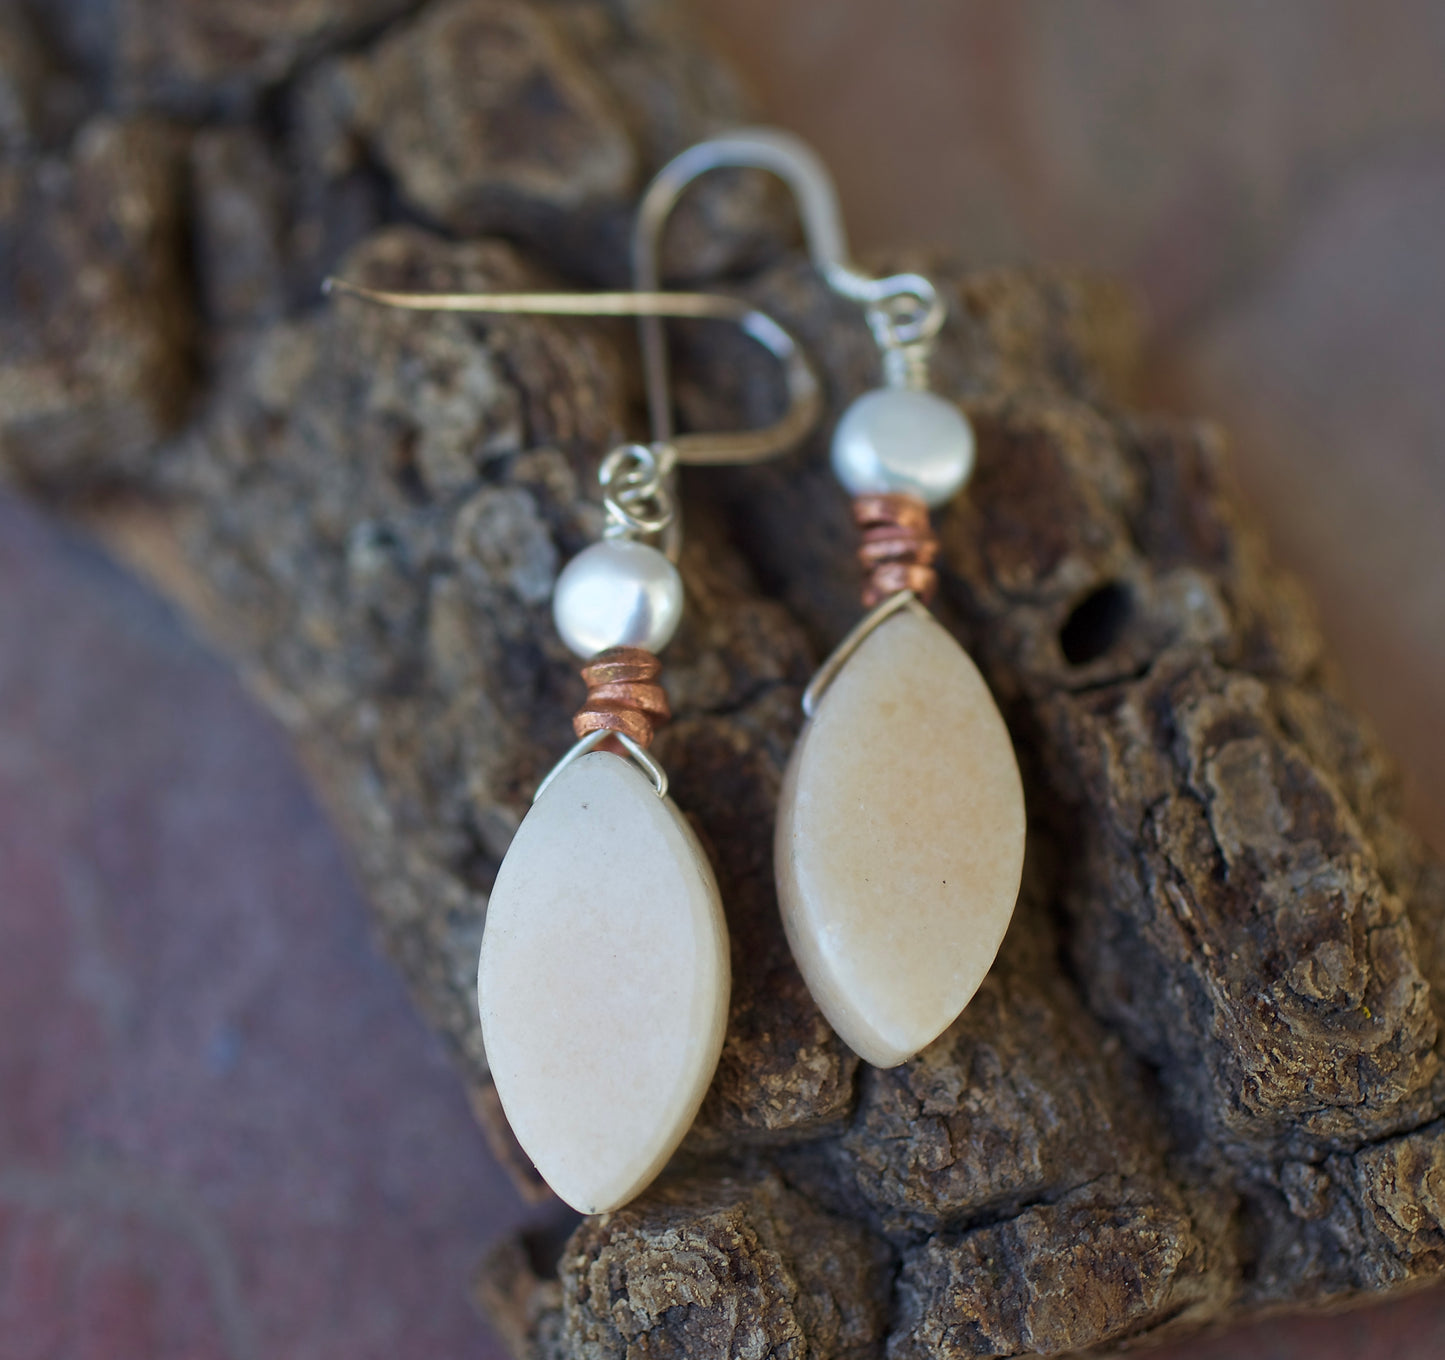 Sale! Freshwater Pearl, Copper, Peach Quartz, and Sterling Silver Earrings